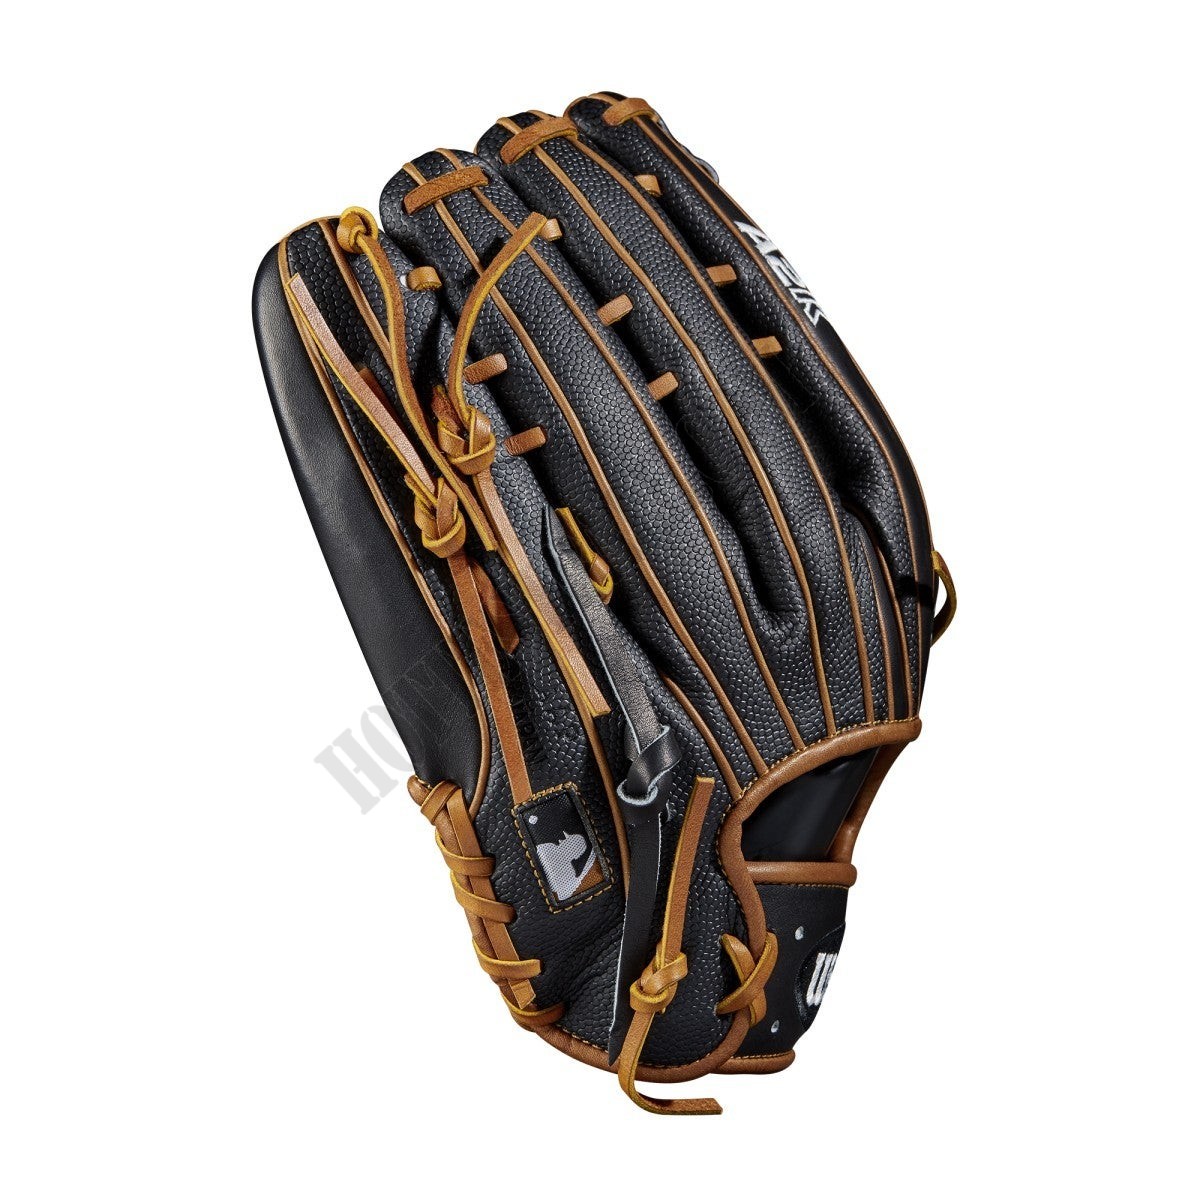 2020 A2K 1775 12.75" Outfield Baseball Glove ● Wilson Promotions - -4